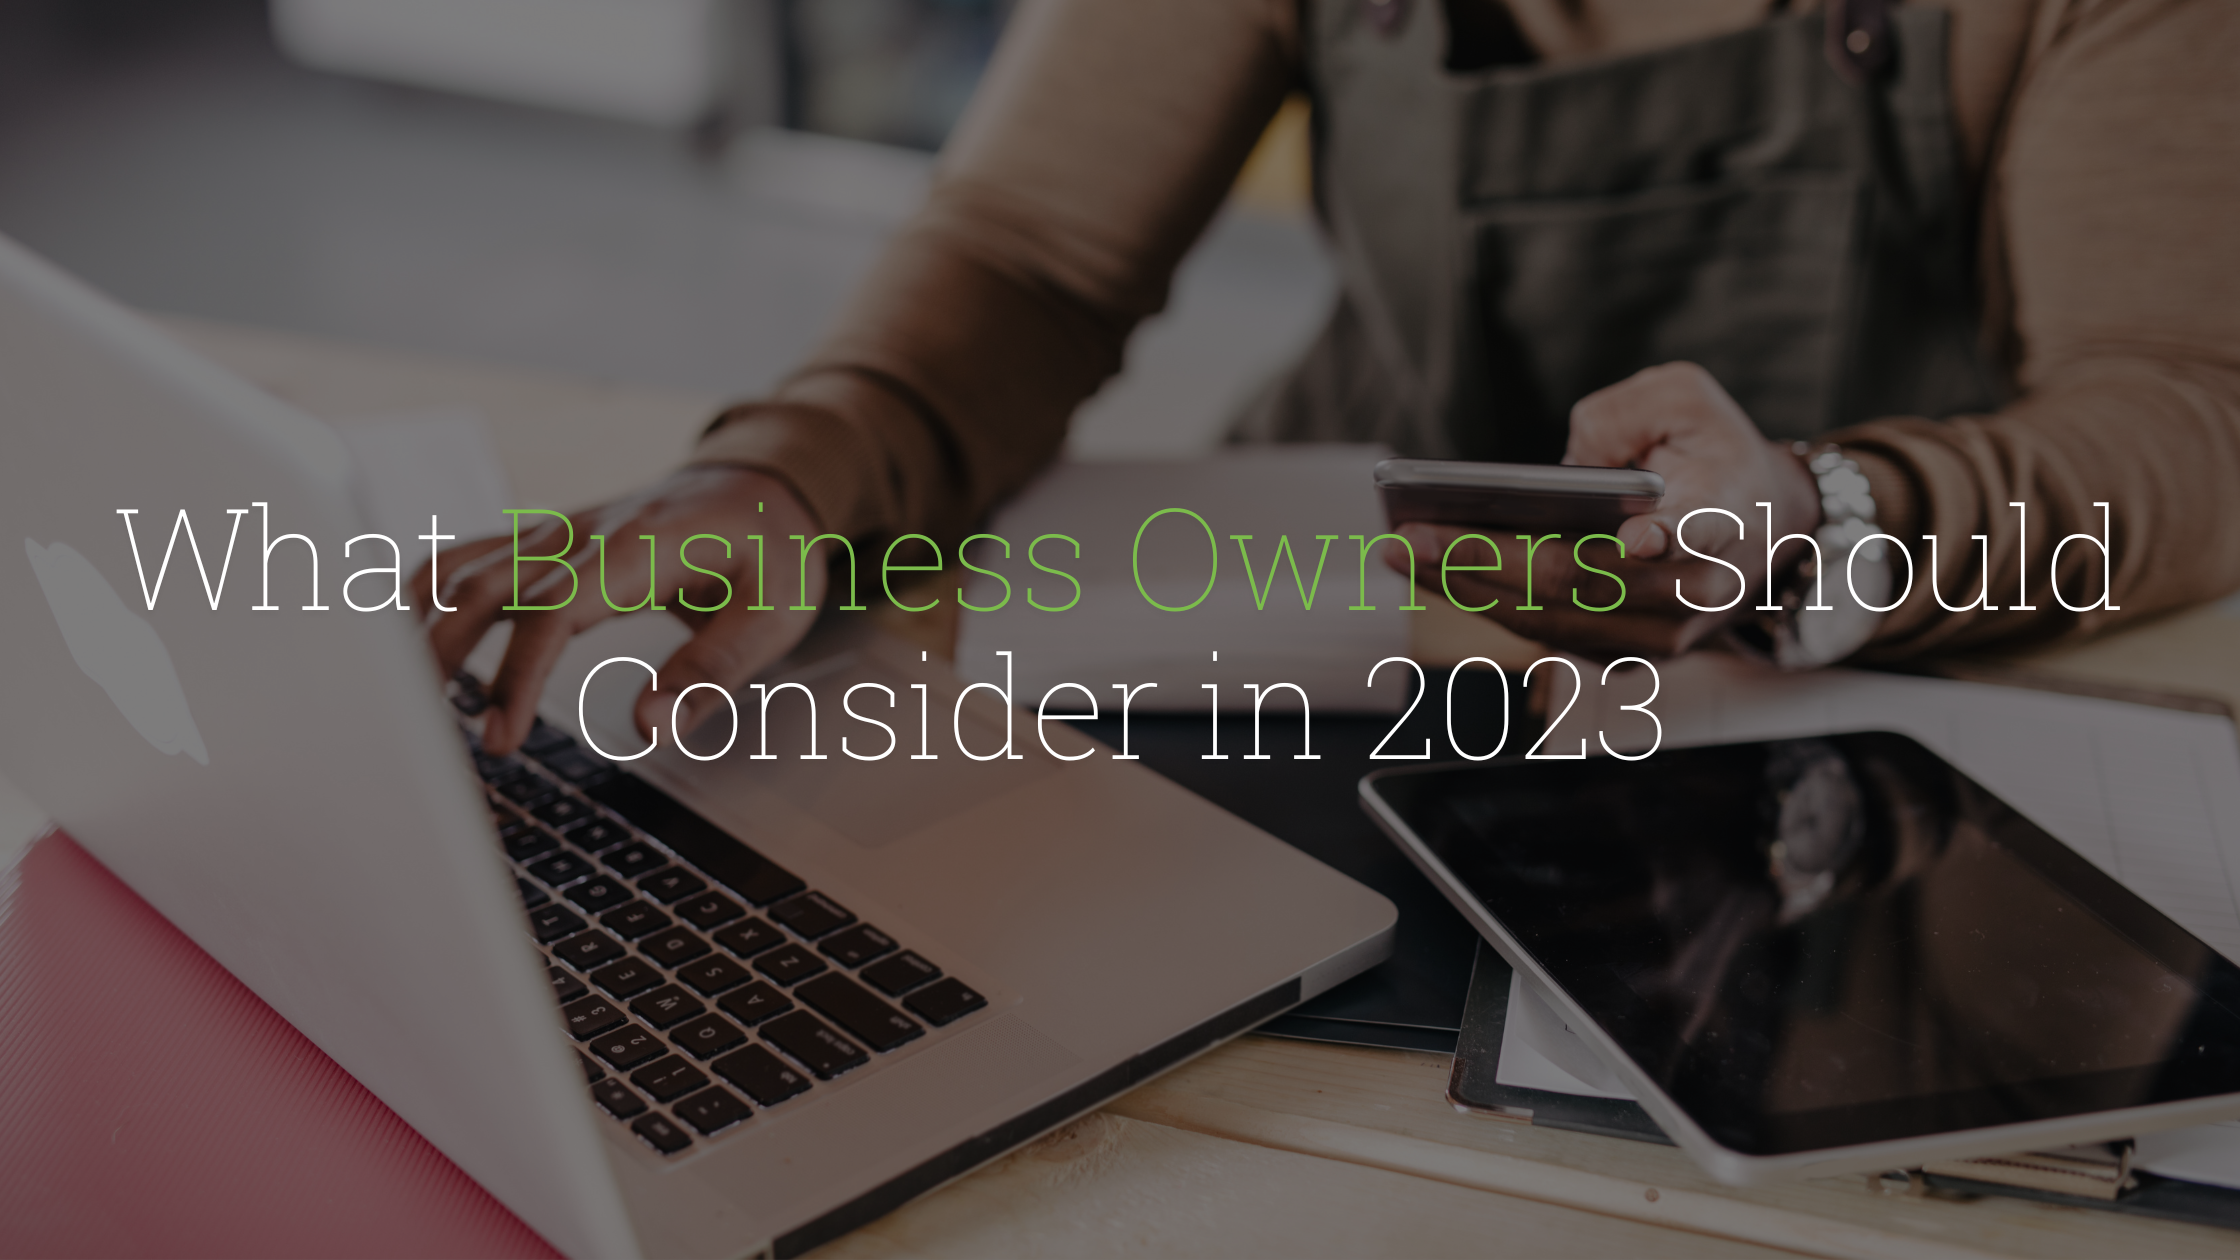 Setting Business Goals for 2023